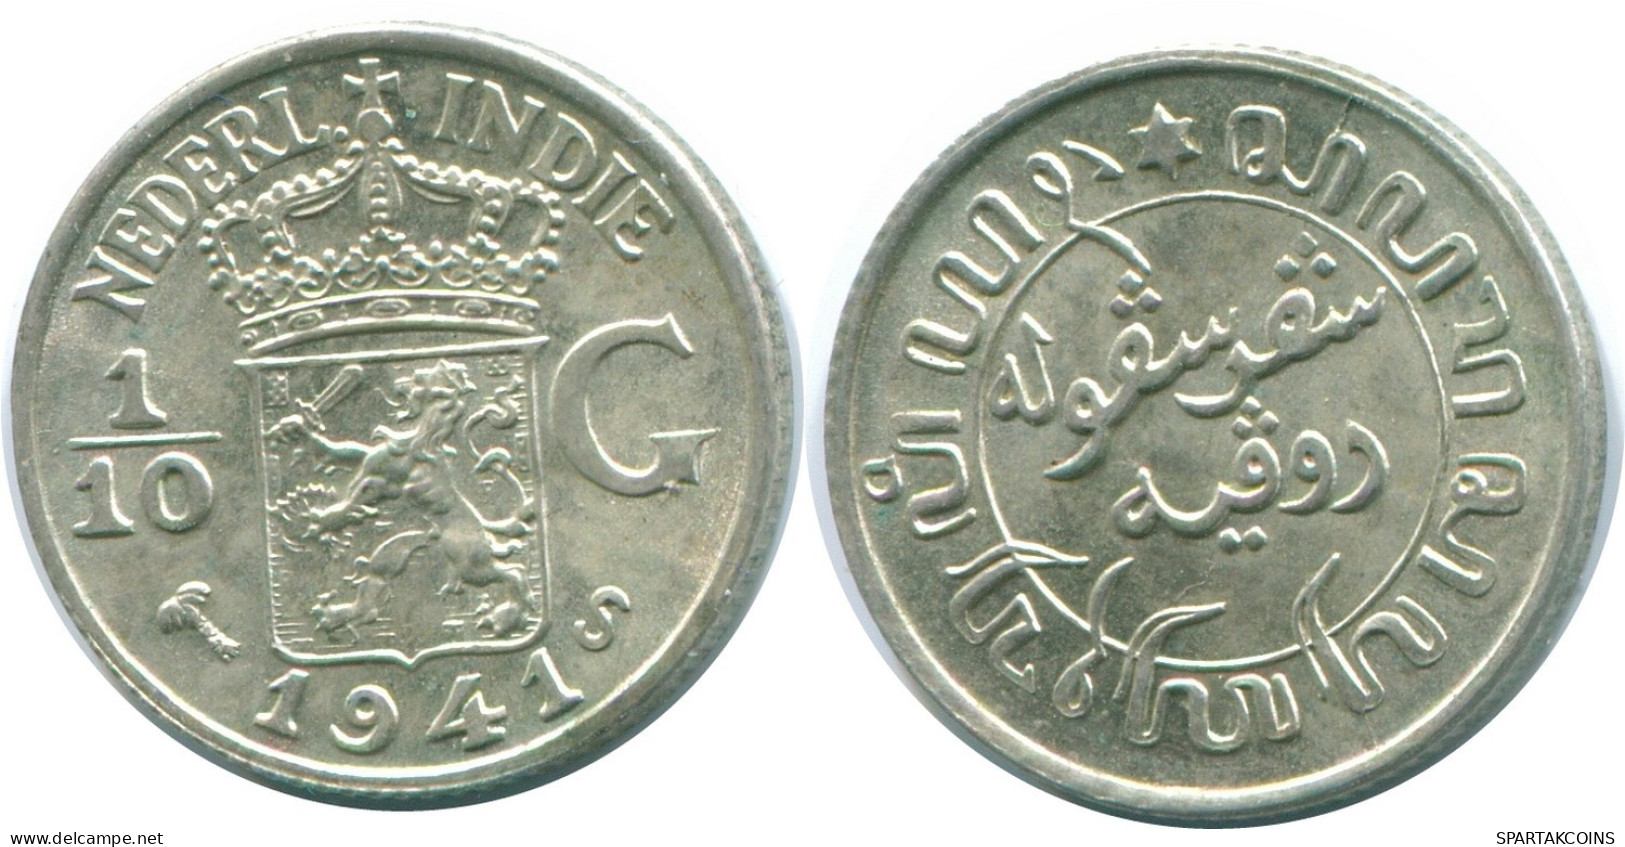 1/10 GULDEN 1941 S NETHERLANDS EAST INDIES SILVER Colonial Coin #NL13567.3.U.A - Indes Neerlandesas